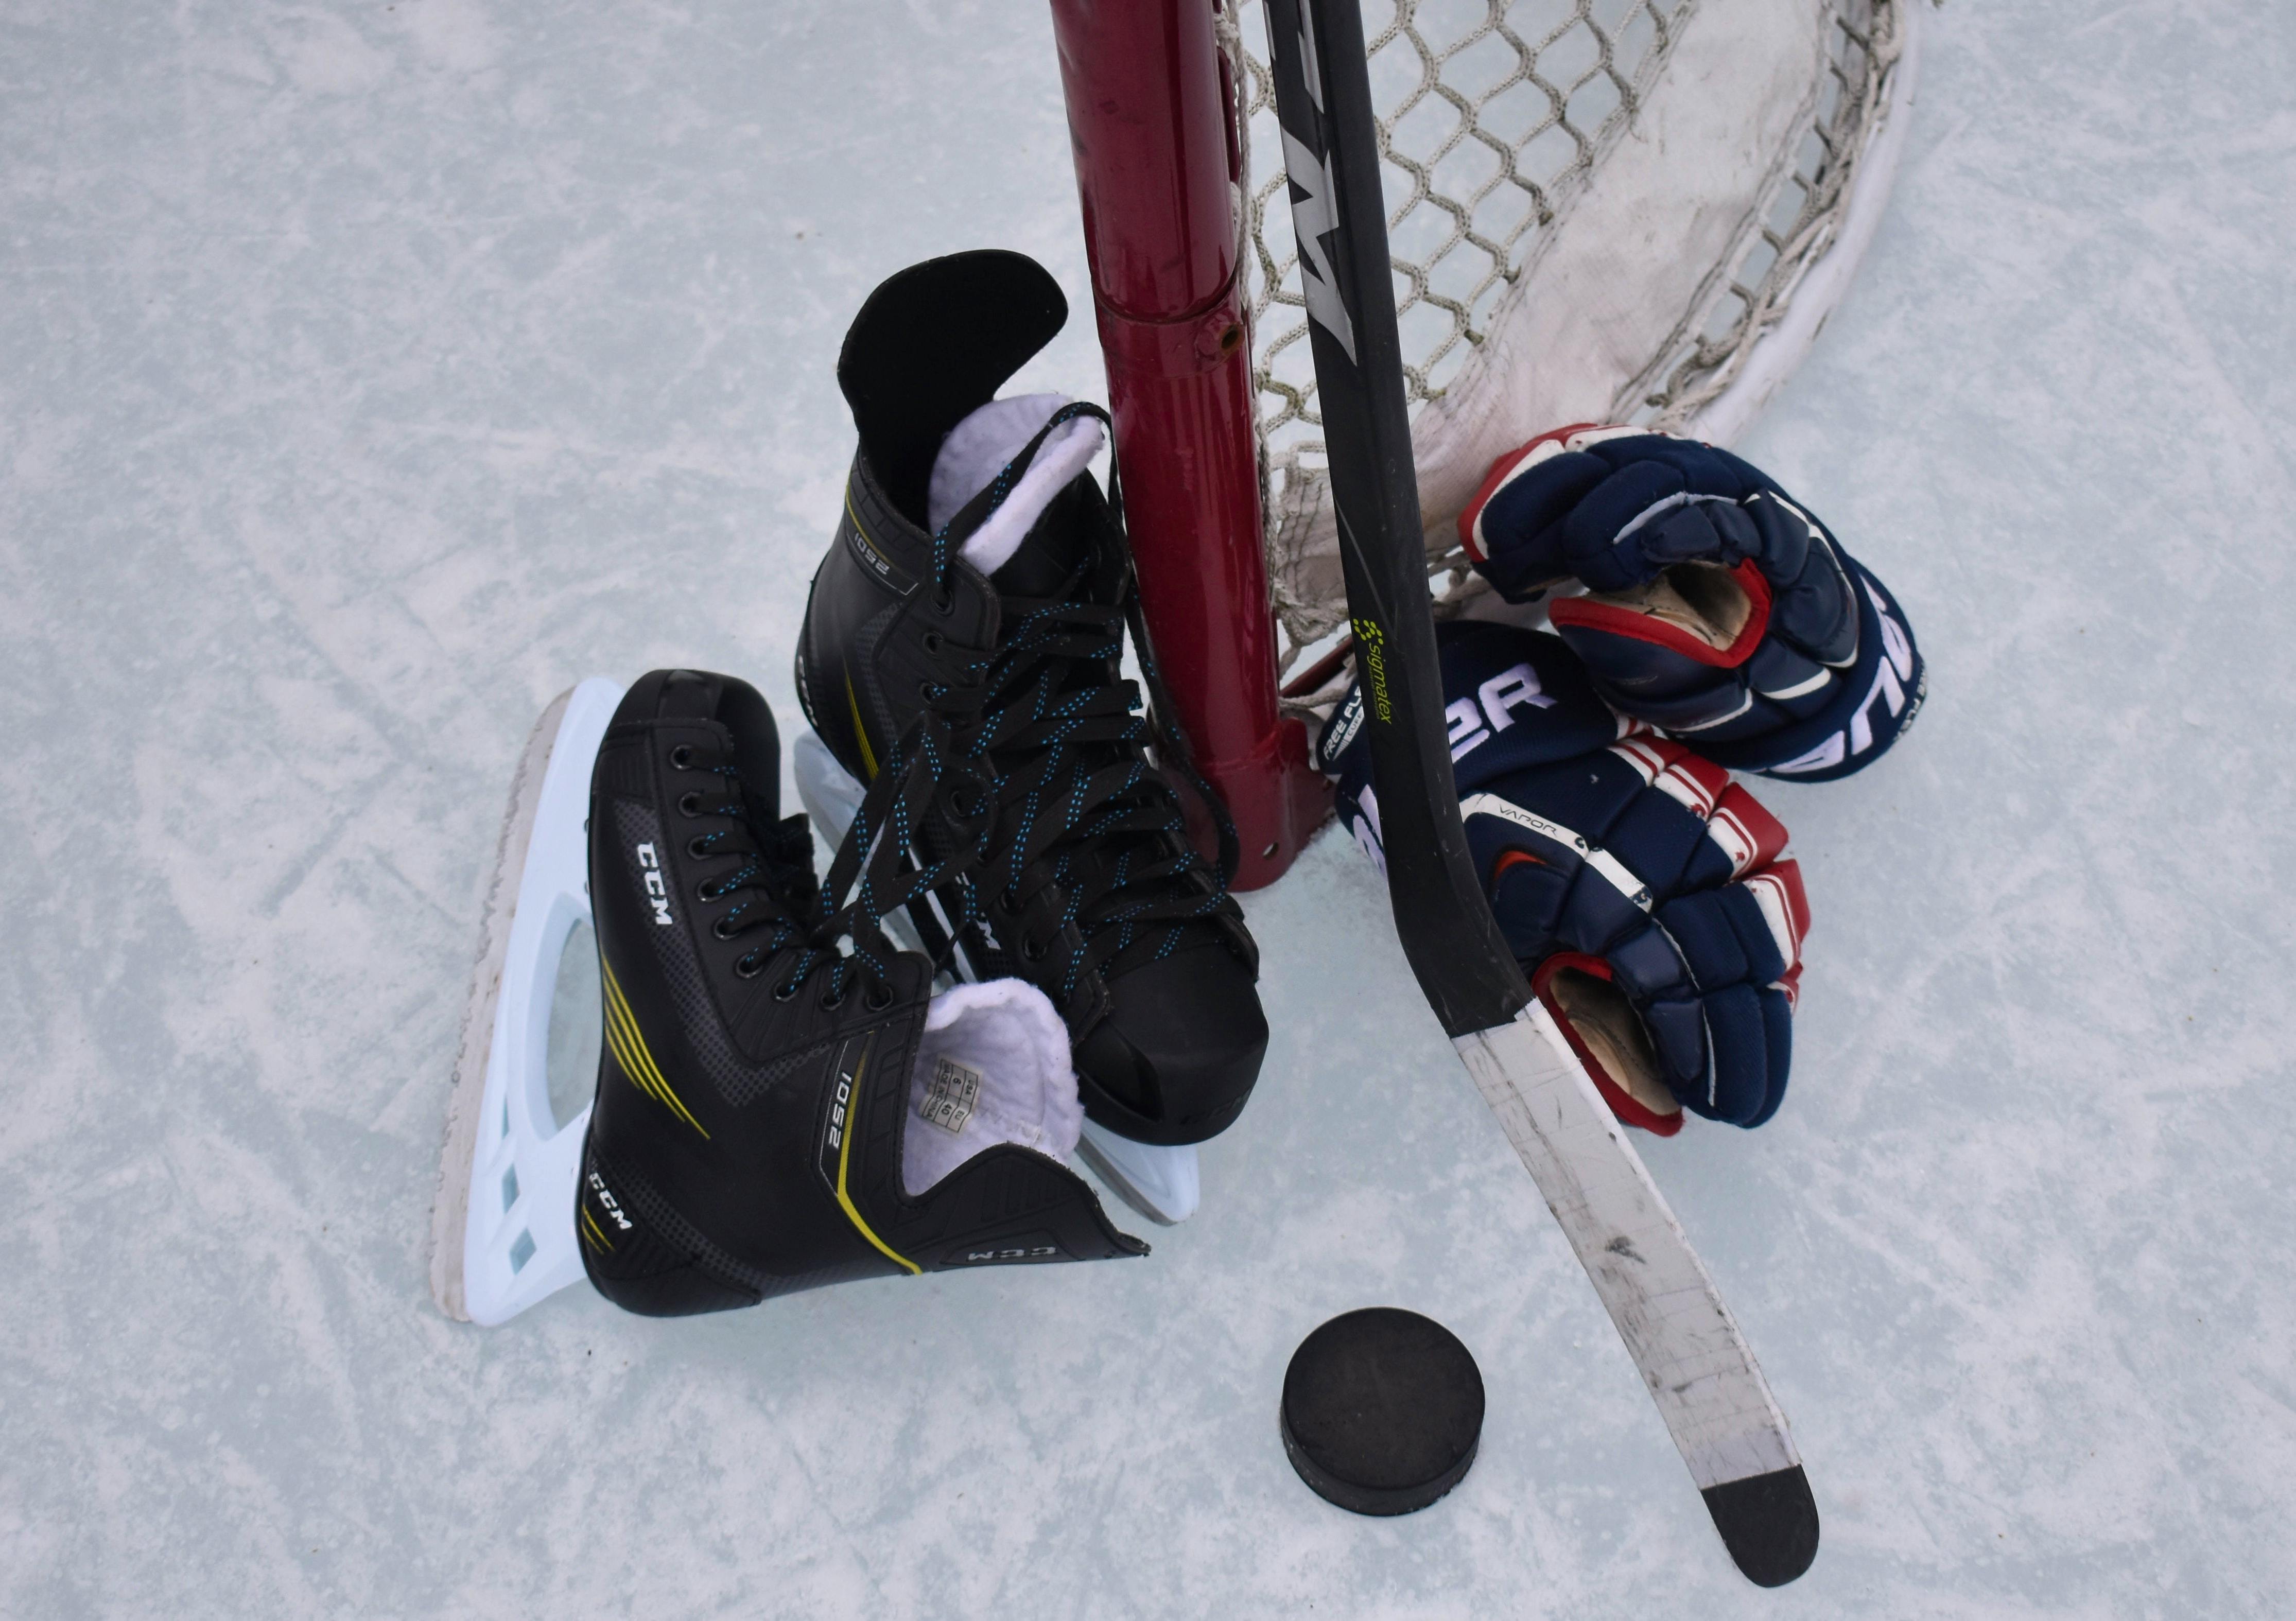 WHY HOCKEY IS THE BEST SPORT YOUR CHILD CAN PLAY! — Elite Amateur Sports